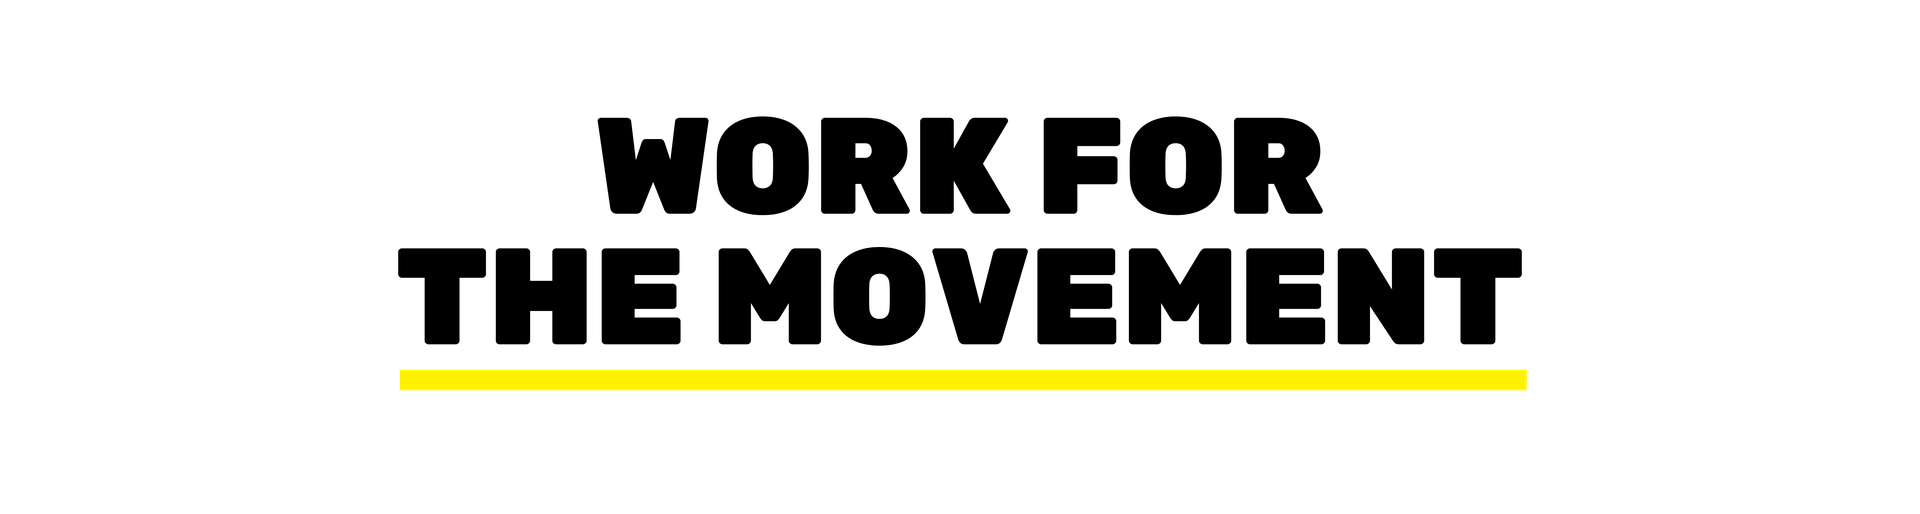 Bold black text reads ''''Work for the Movement'''' with a yellow line underneath the text.